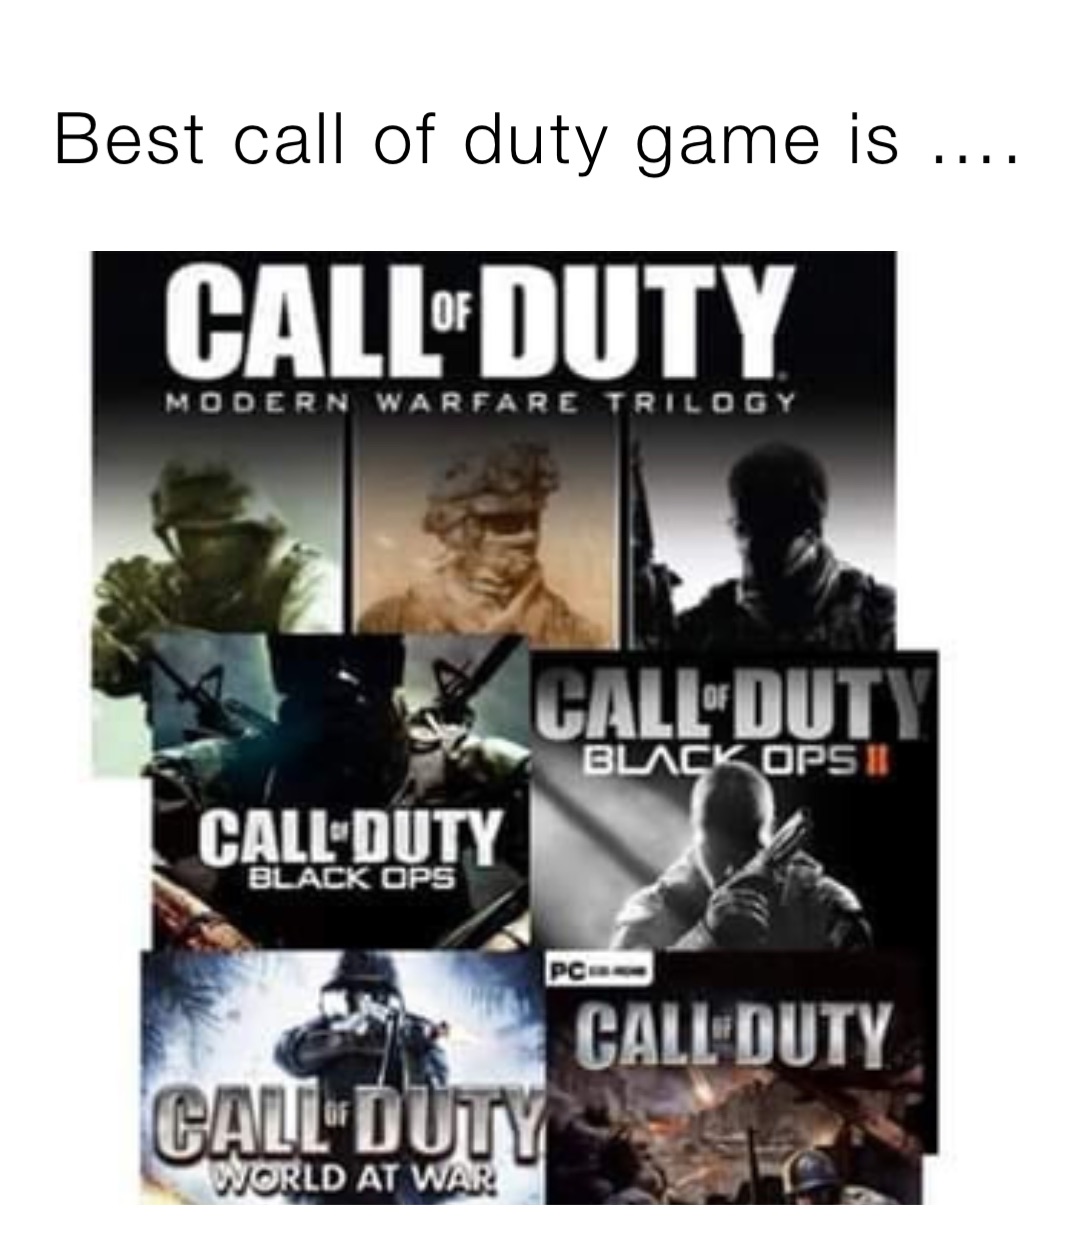 BEST CALL OF DUTY GAME is ….